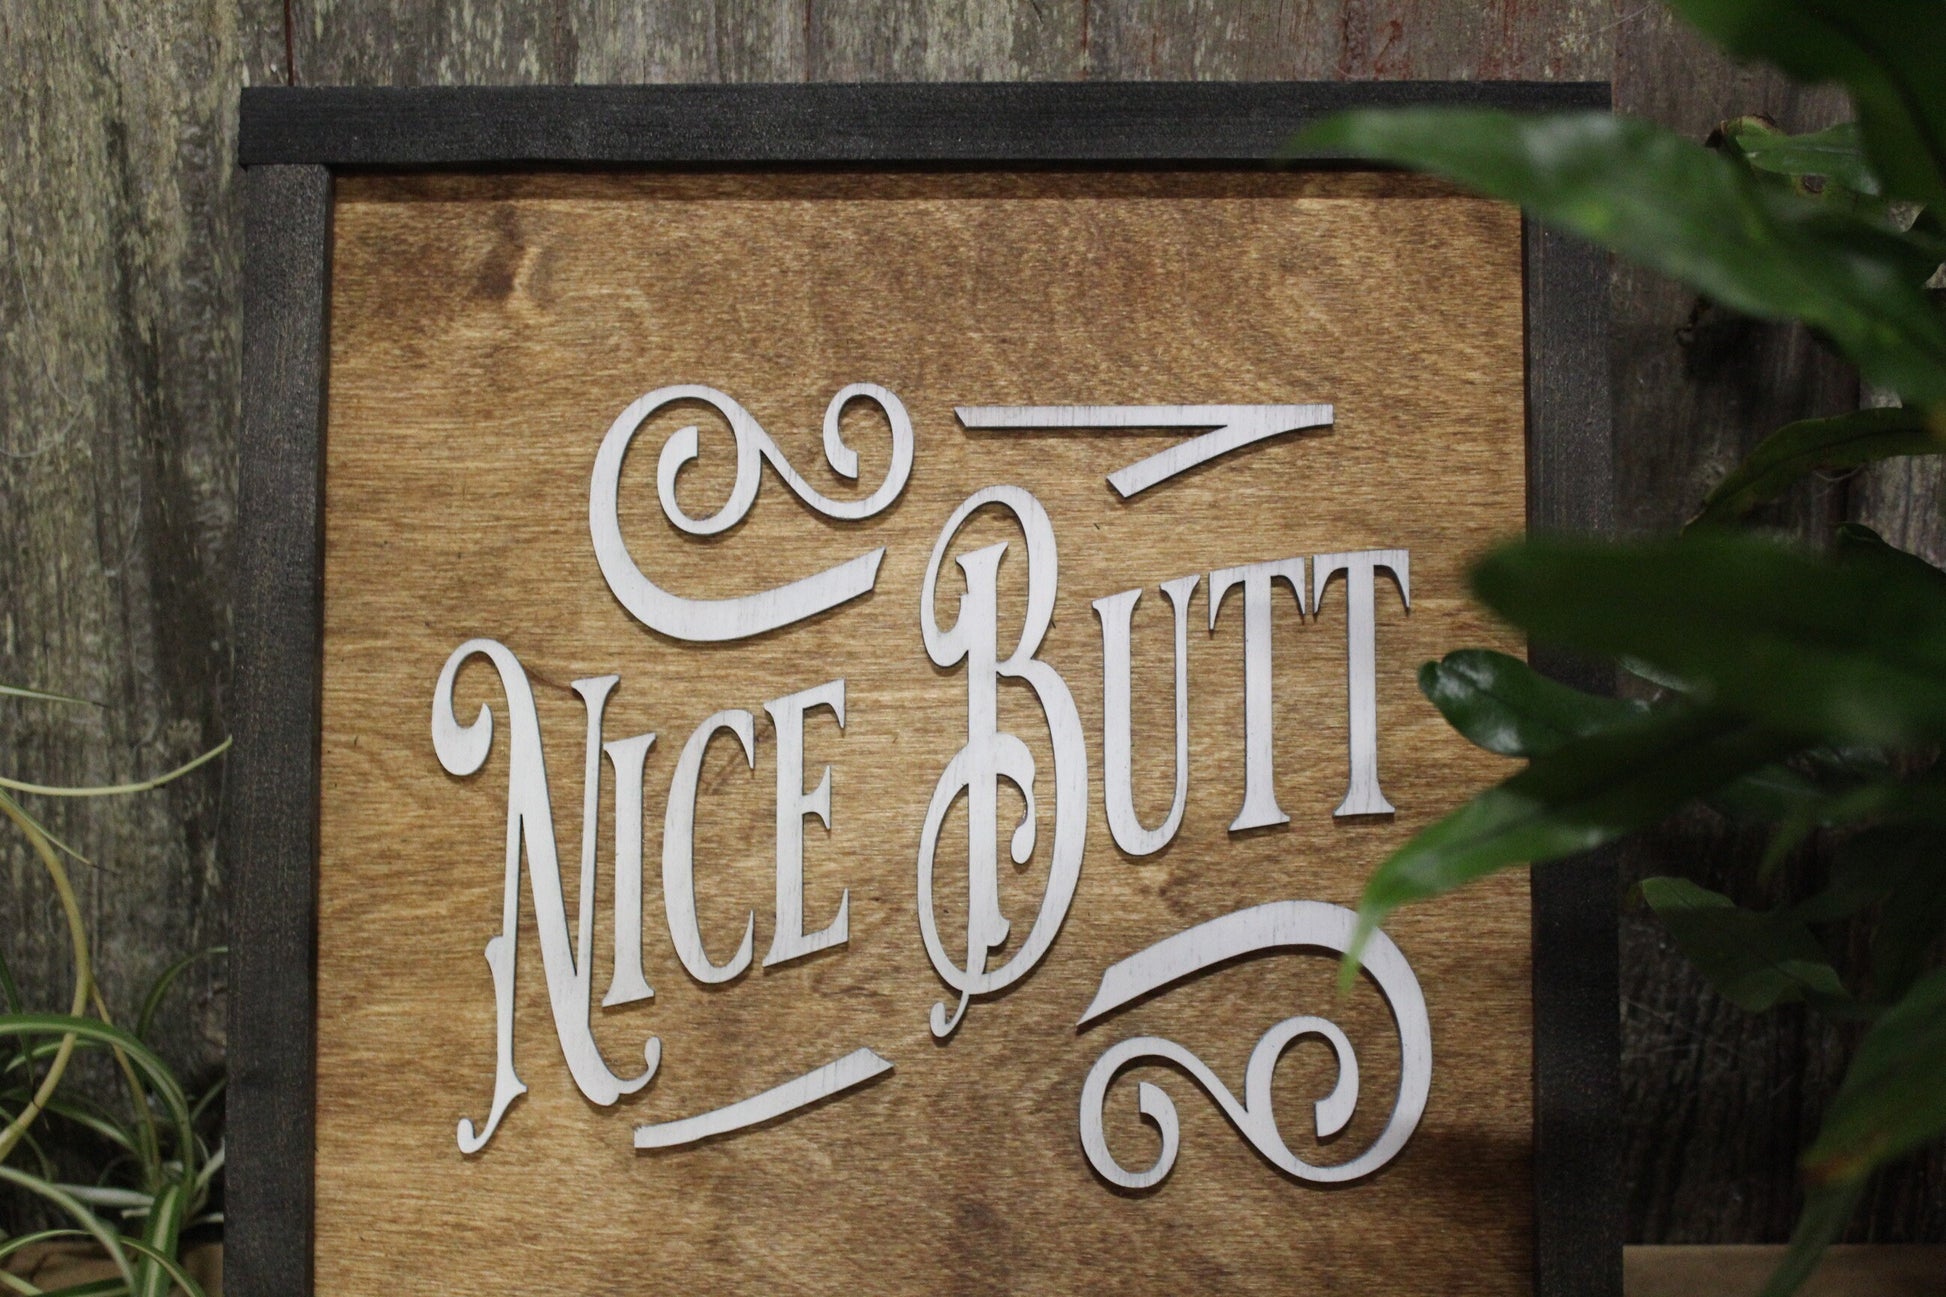 Nice Butt Wooden Square Sign Funny Humor Bathroom Toilet Rustic Primitive Gag Gift Wall Decor Farmhouse Decoration Framed Wood Fancy Letters